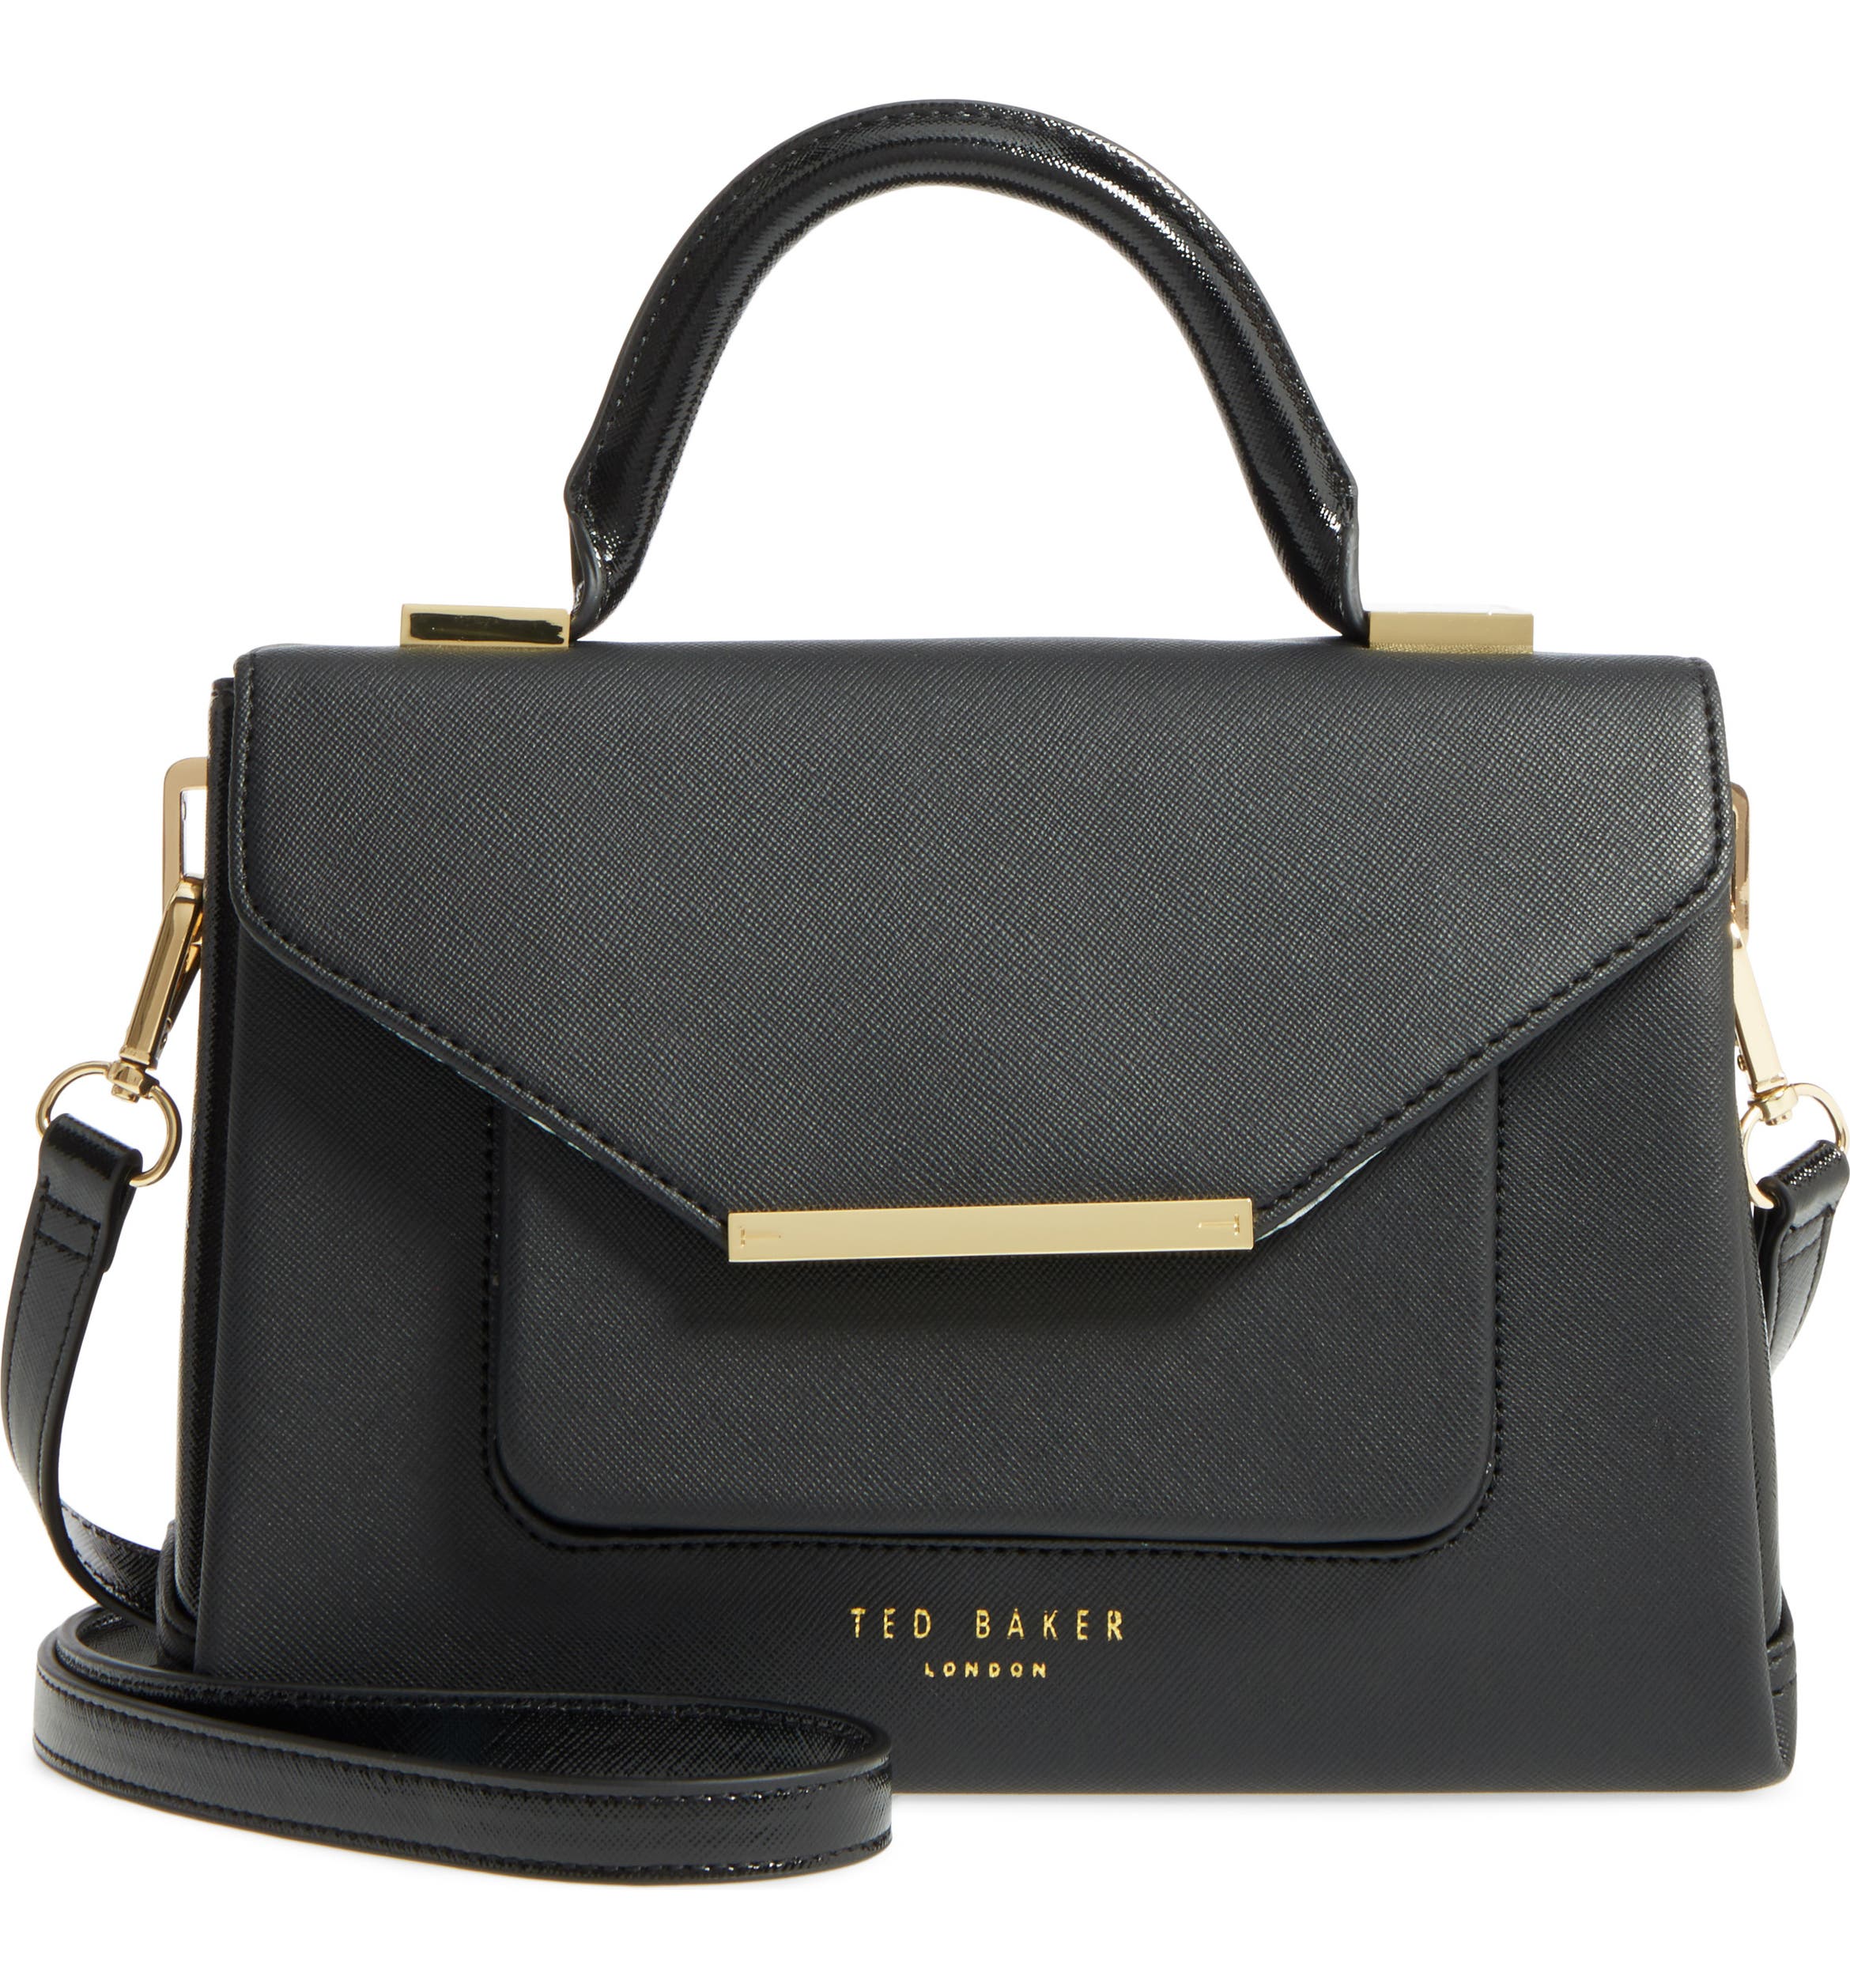 Ted Baker London Faux Leather Satchel | Nordstrom